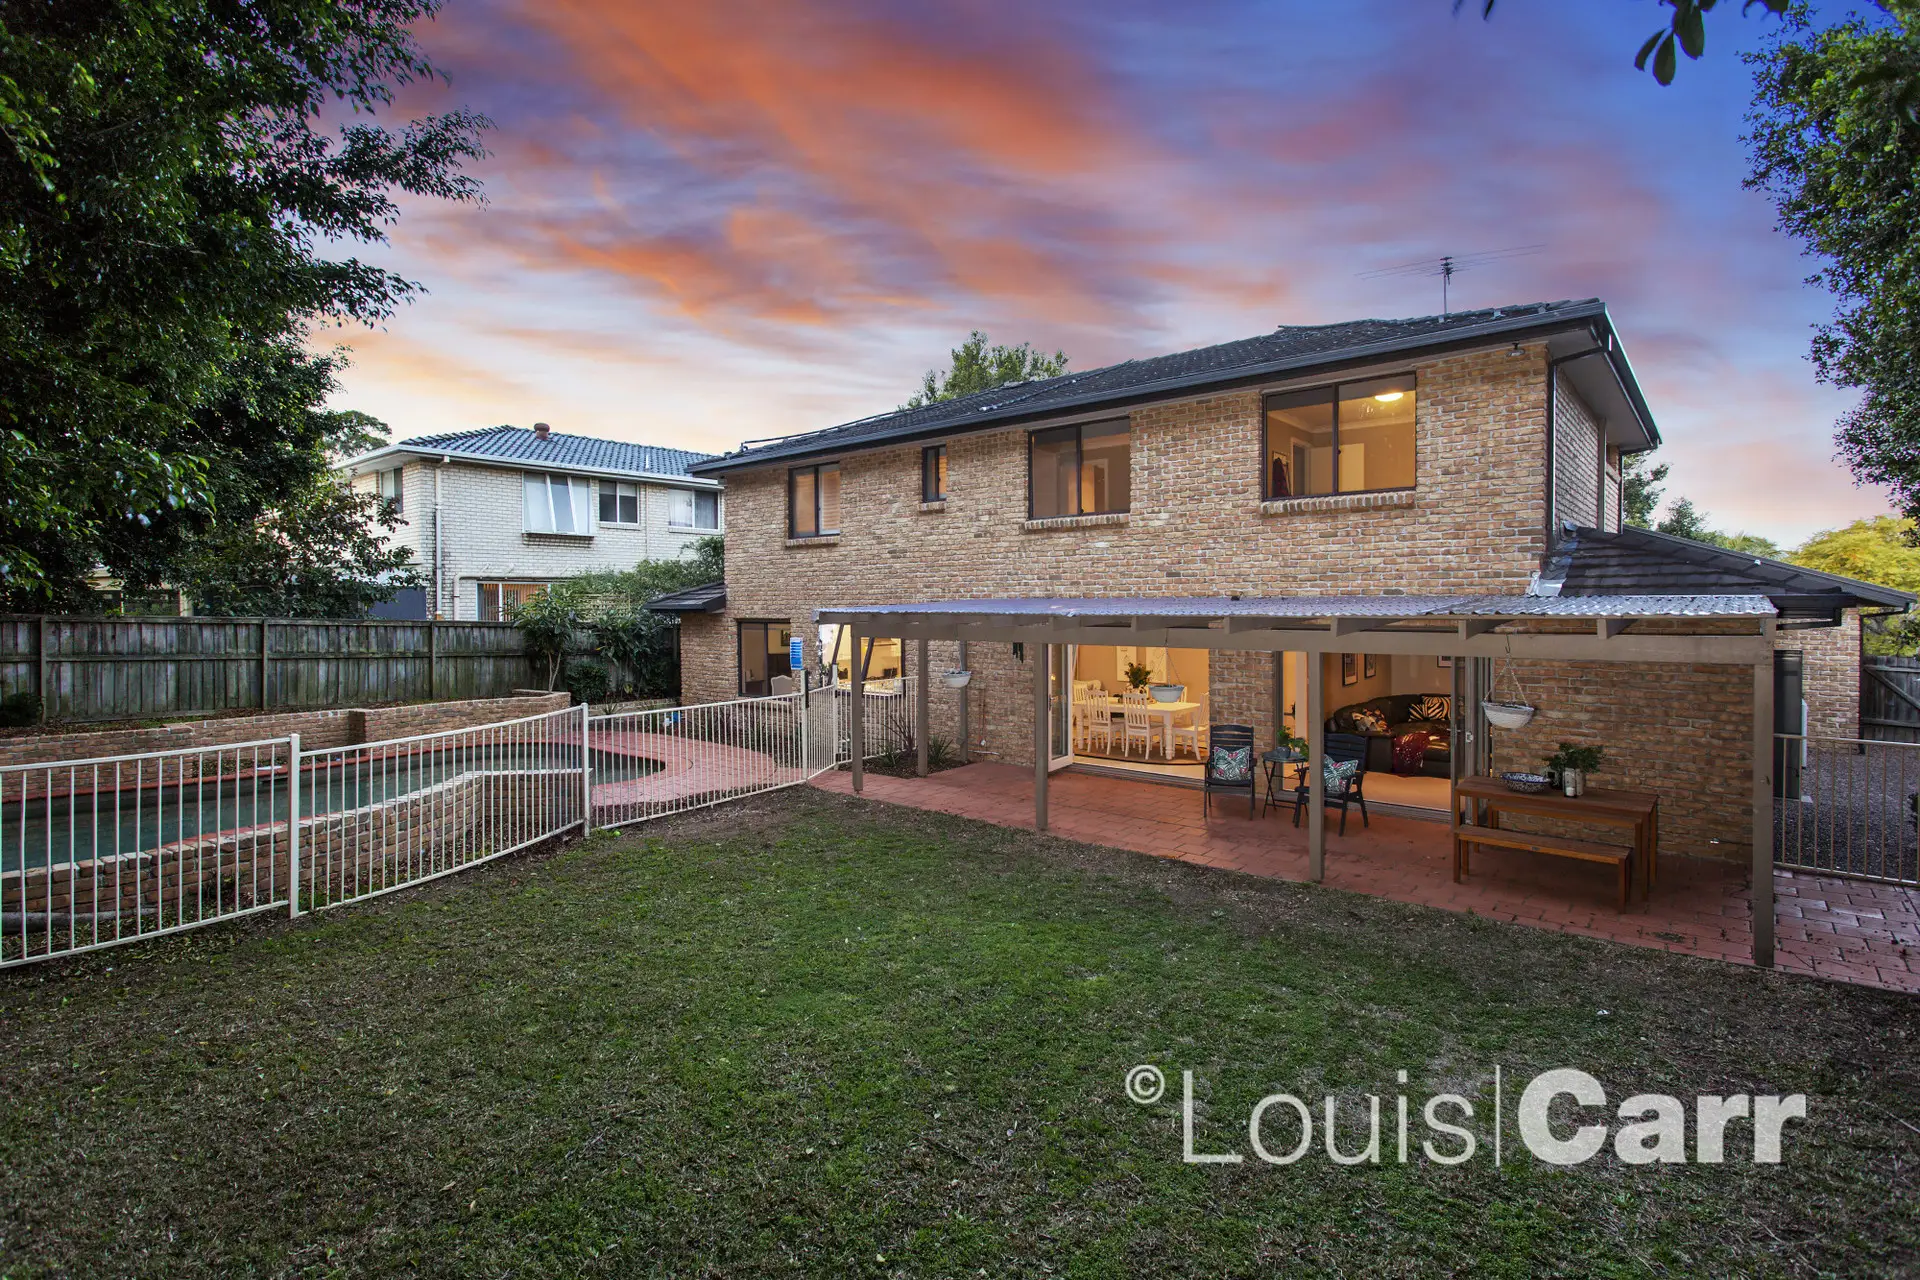 Photo #10: 13 Sanctuary Point Road, West Pennant Hills - Sold by Louis Carr Real Estate